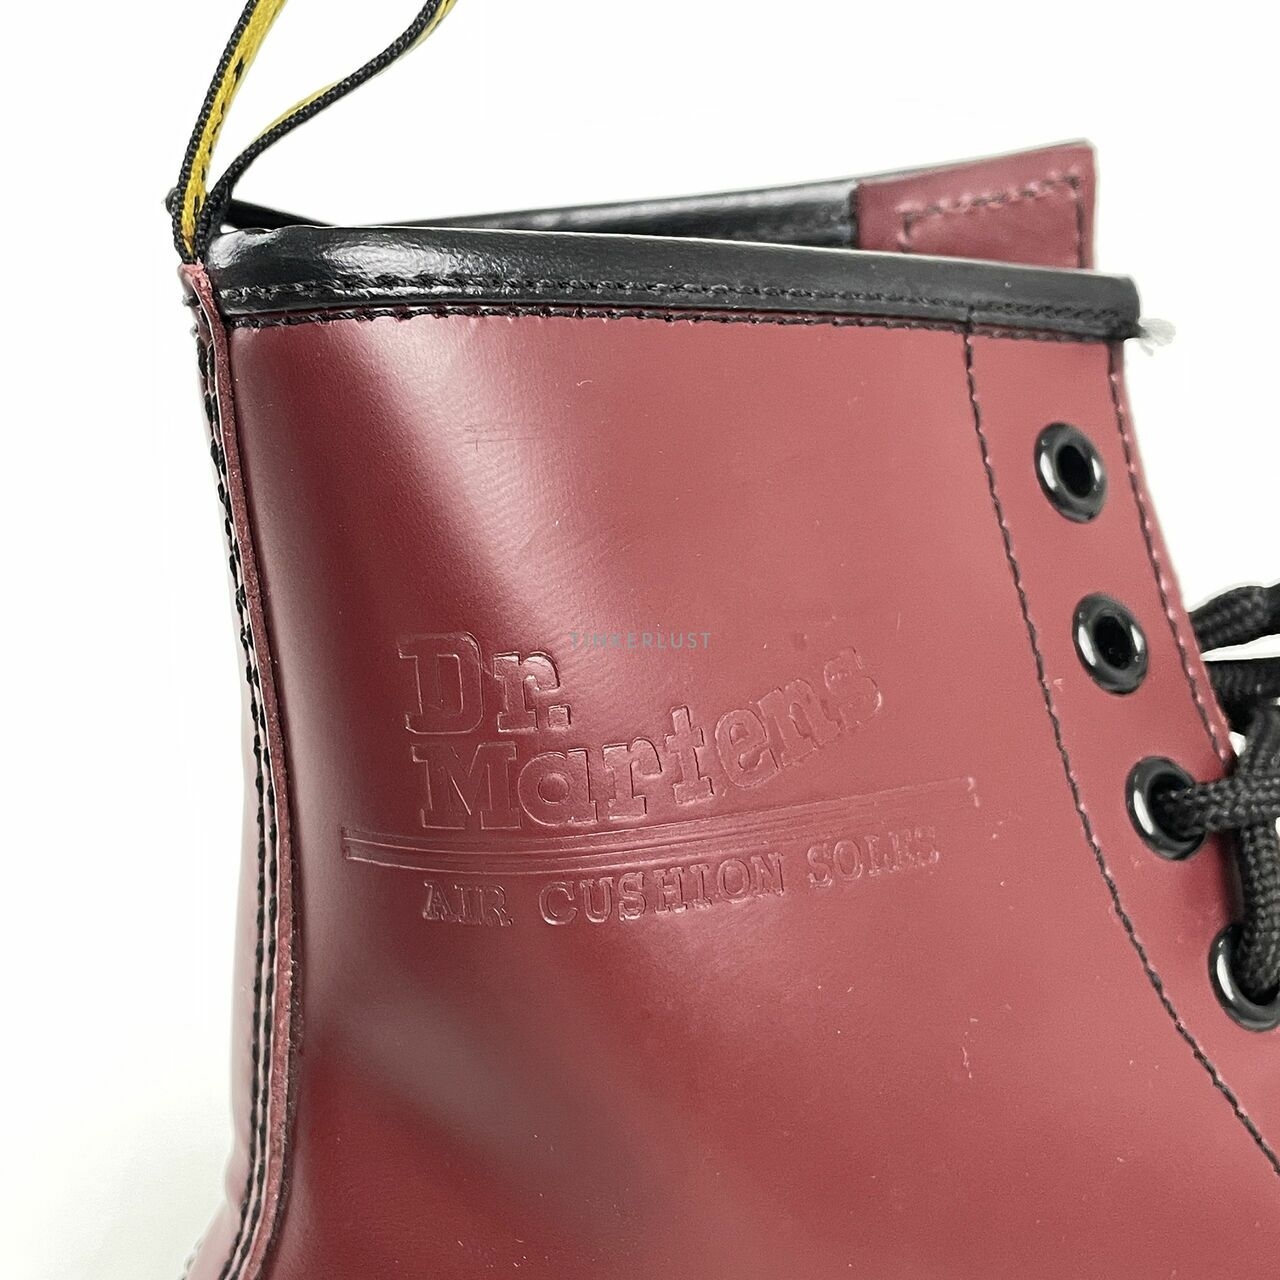 DR MARTENS 1460 8 EYE BOOT - CHERRY RED SMOOTH